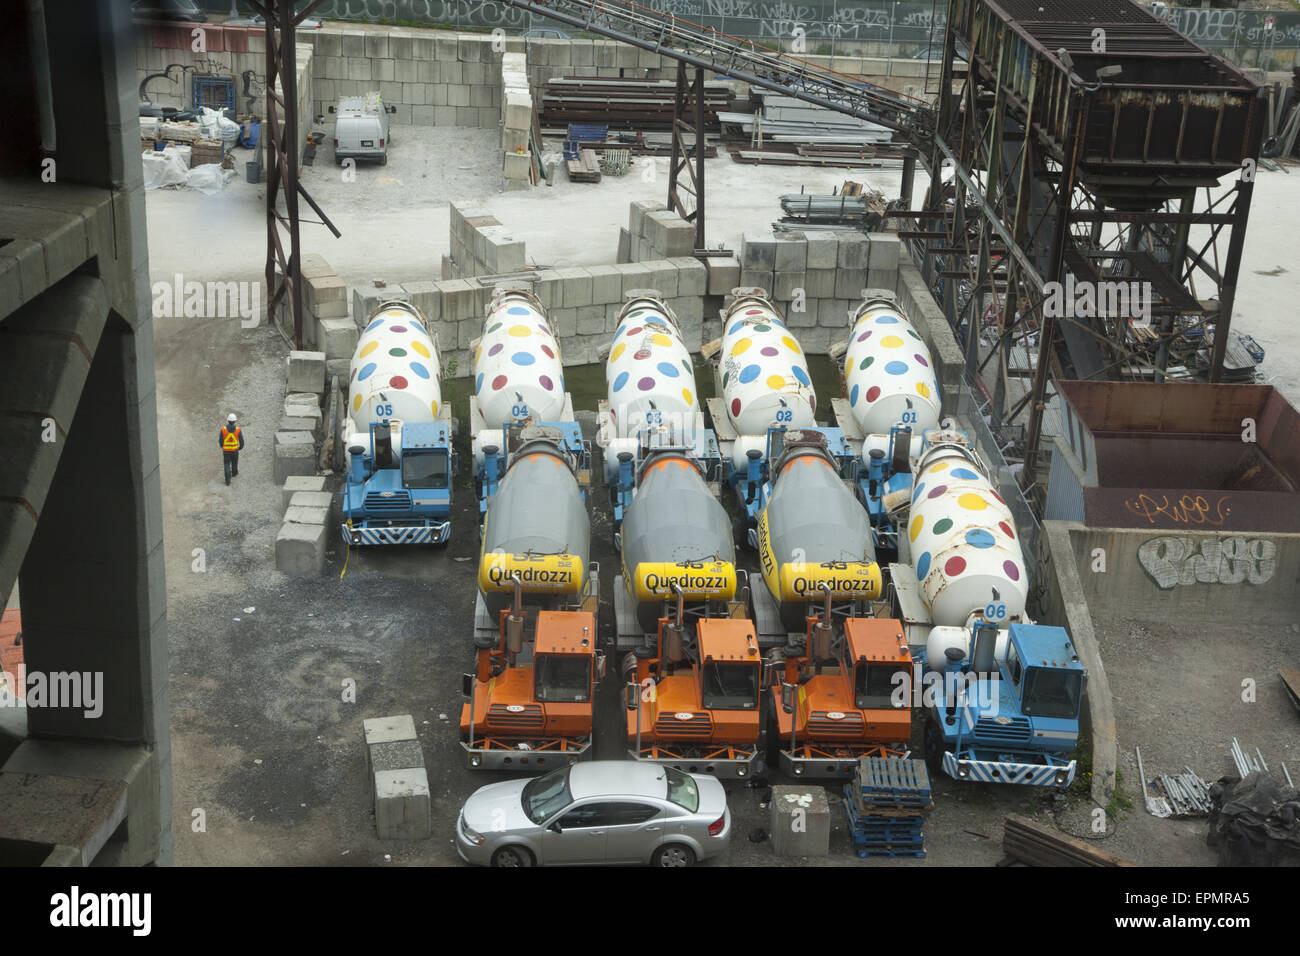 Cement trucks parked at the cement factory in the industrial Gowanus section of Brooklyn, NY. Stock Photo